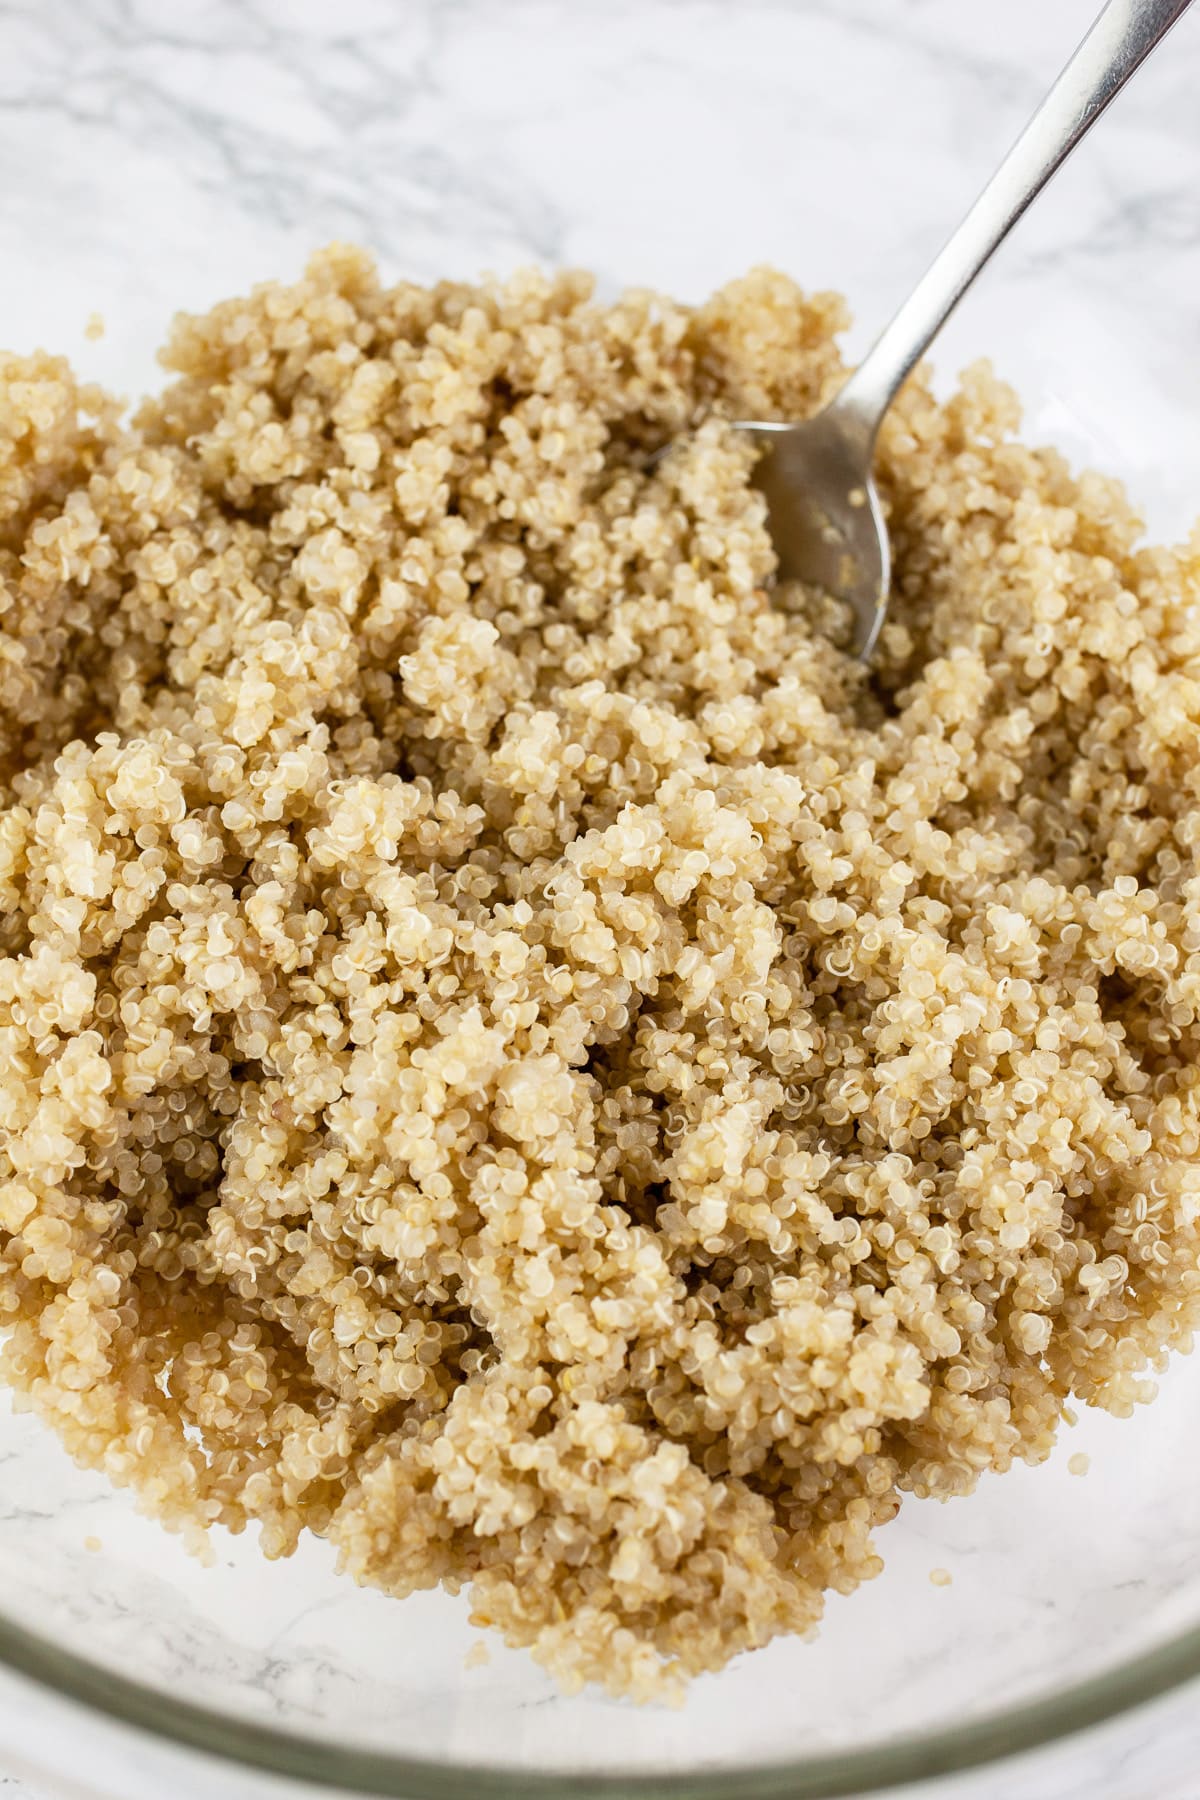 Cooked quinoa in large glass bowl with spoon.